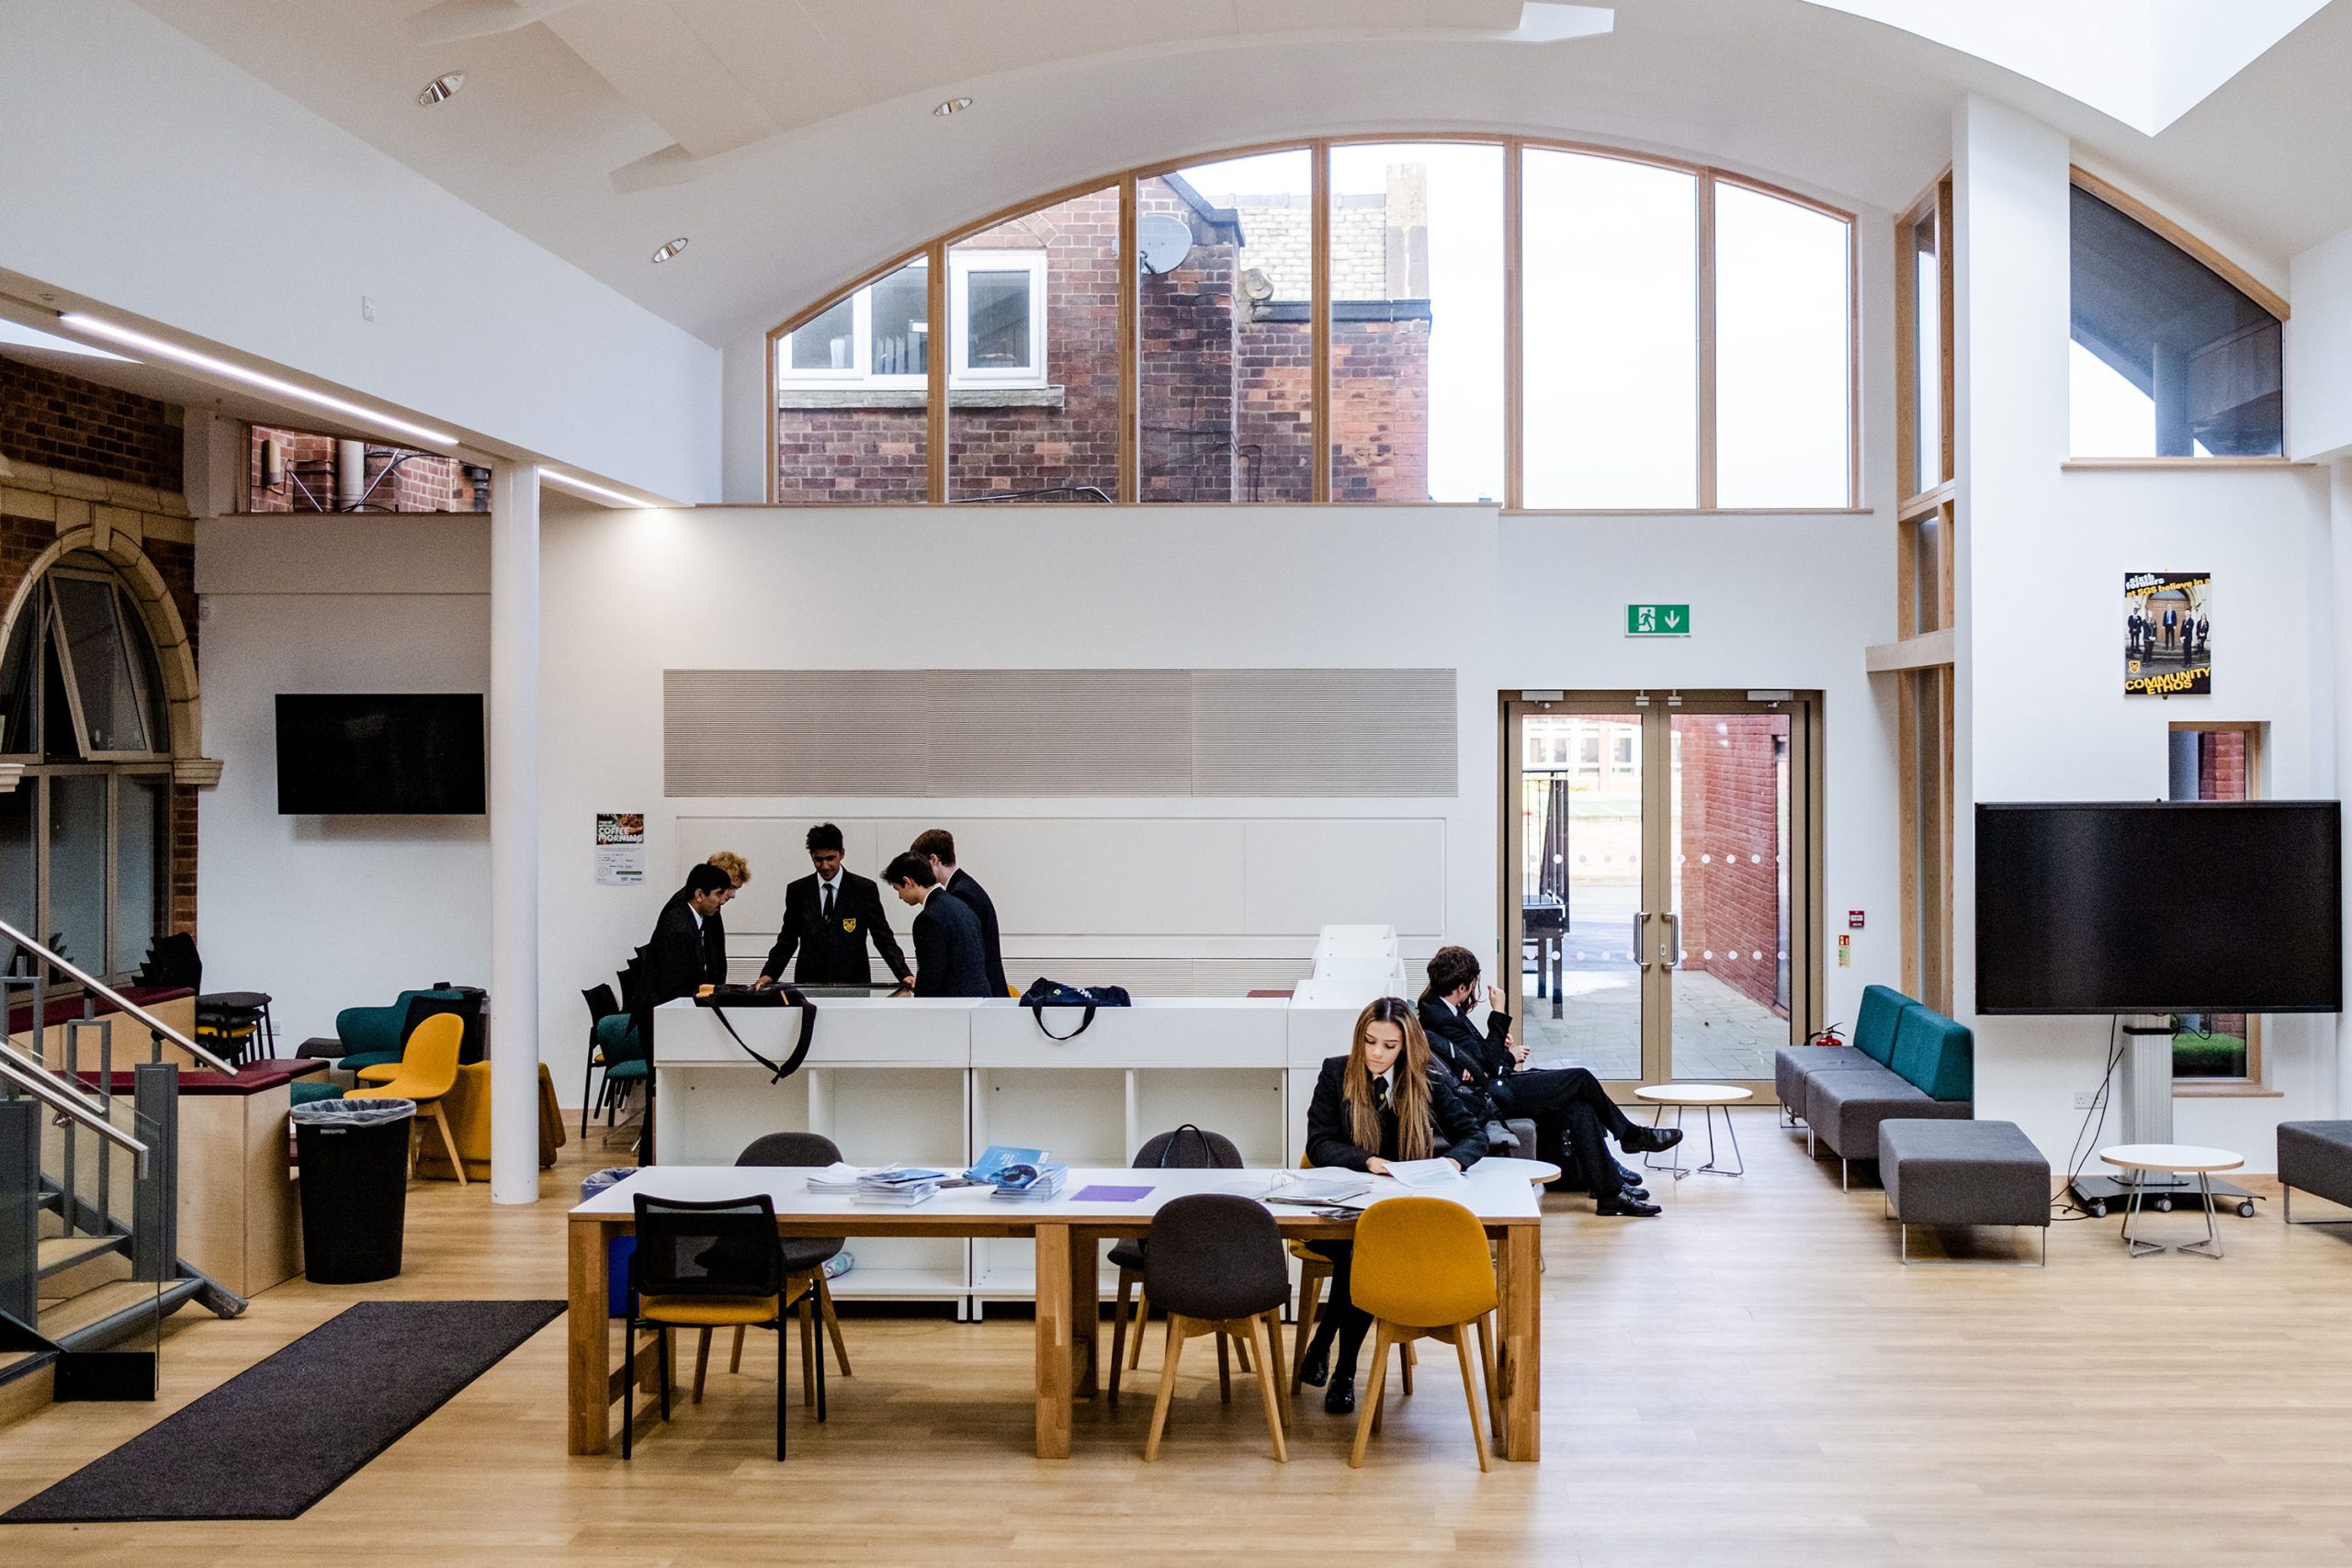 Sixth Form Centre in use